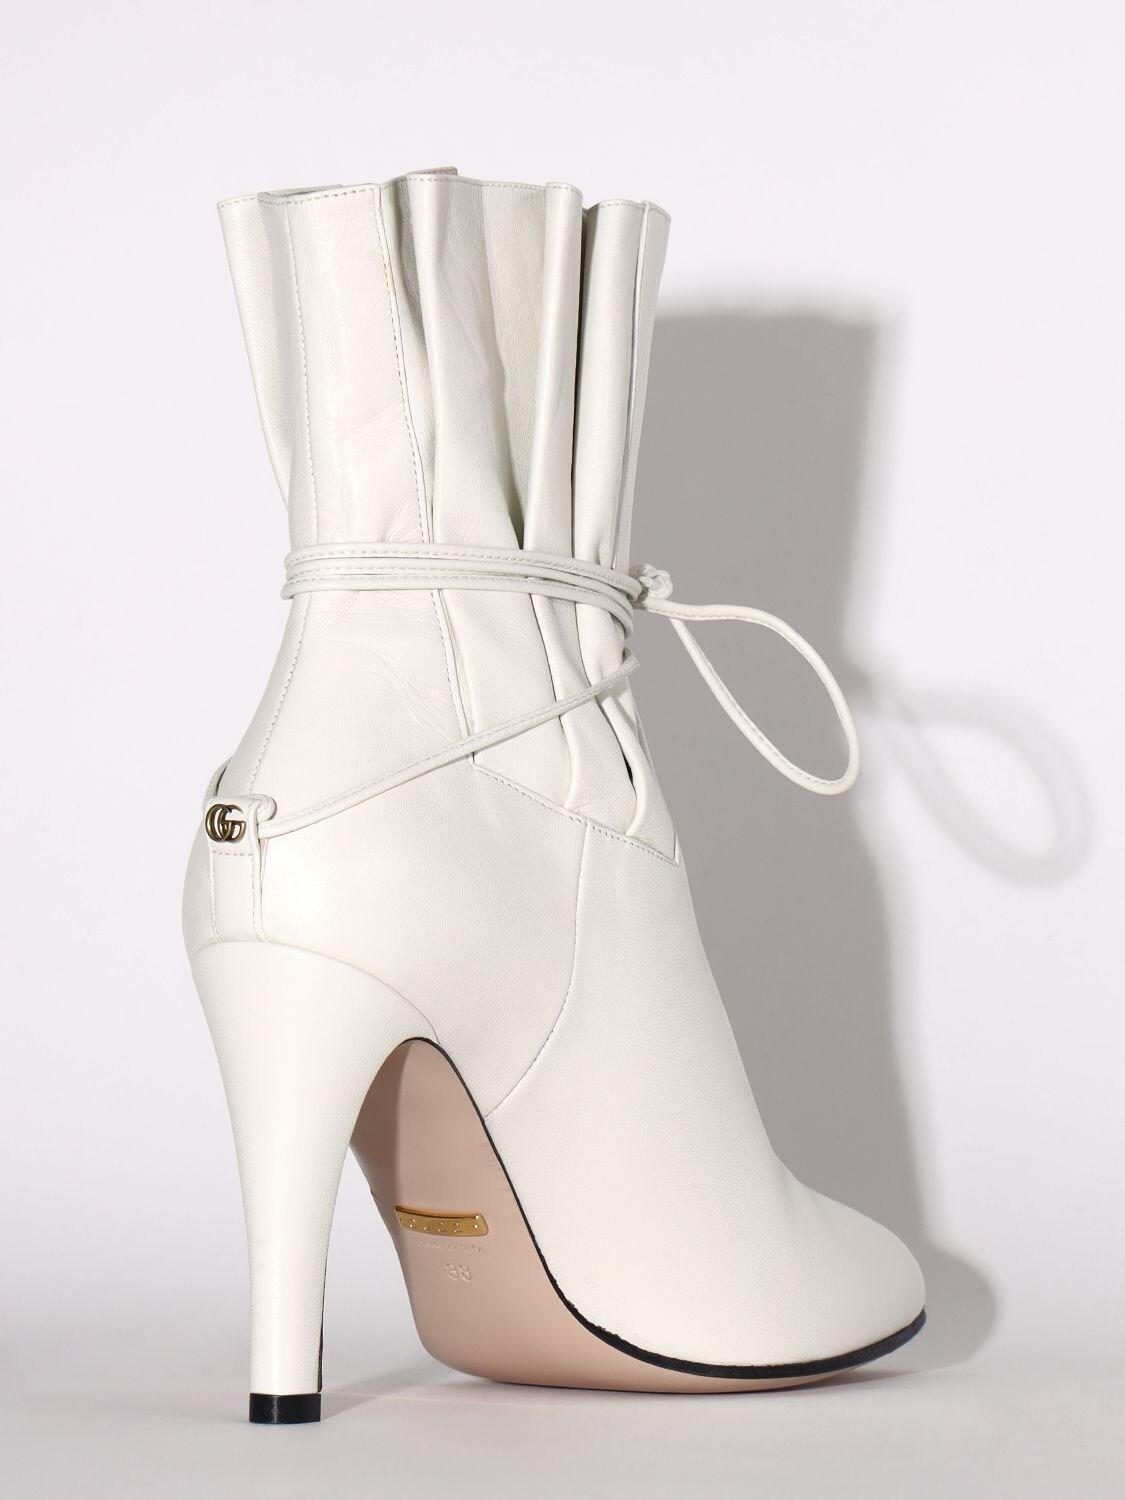 Gucci Leather Ankle Boot in Dusty White (White) - Lyst